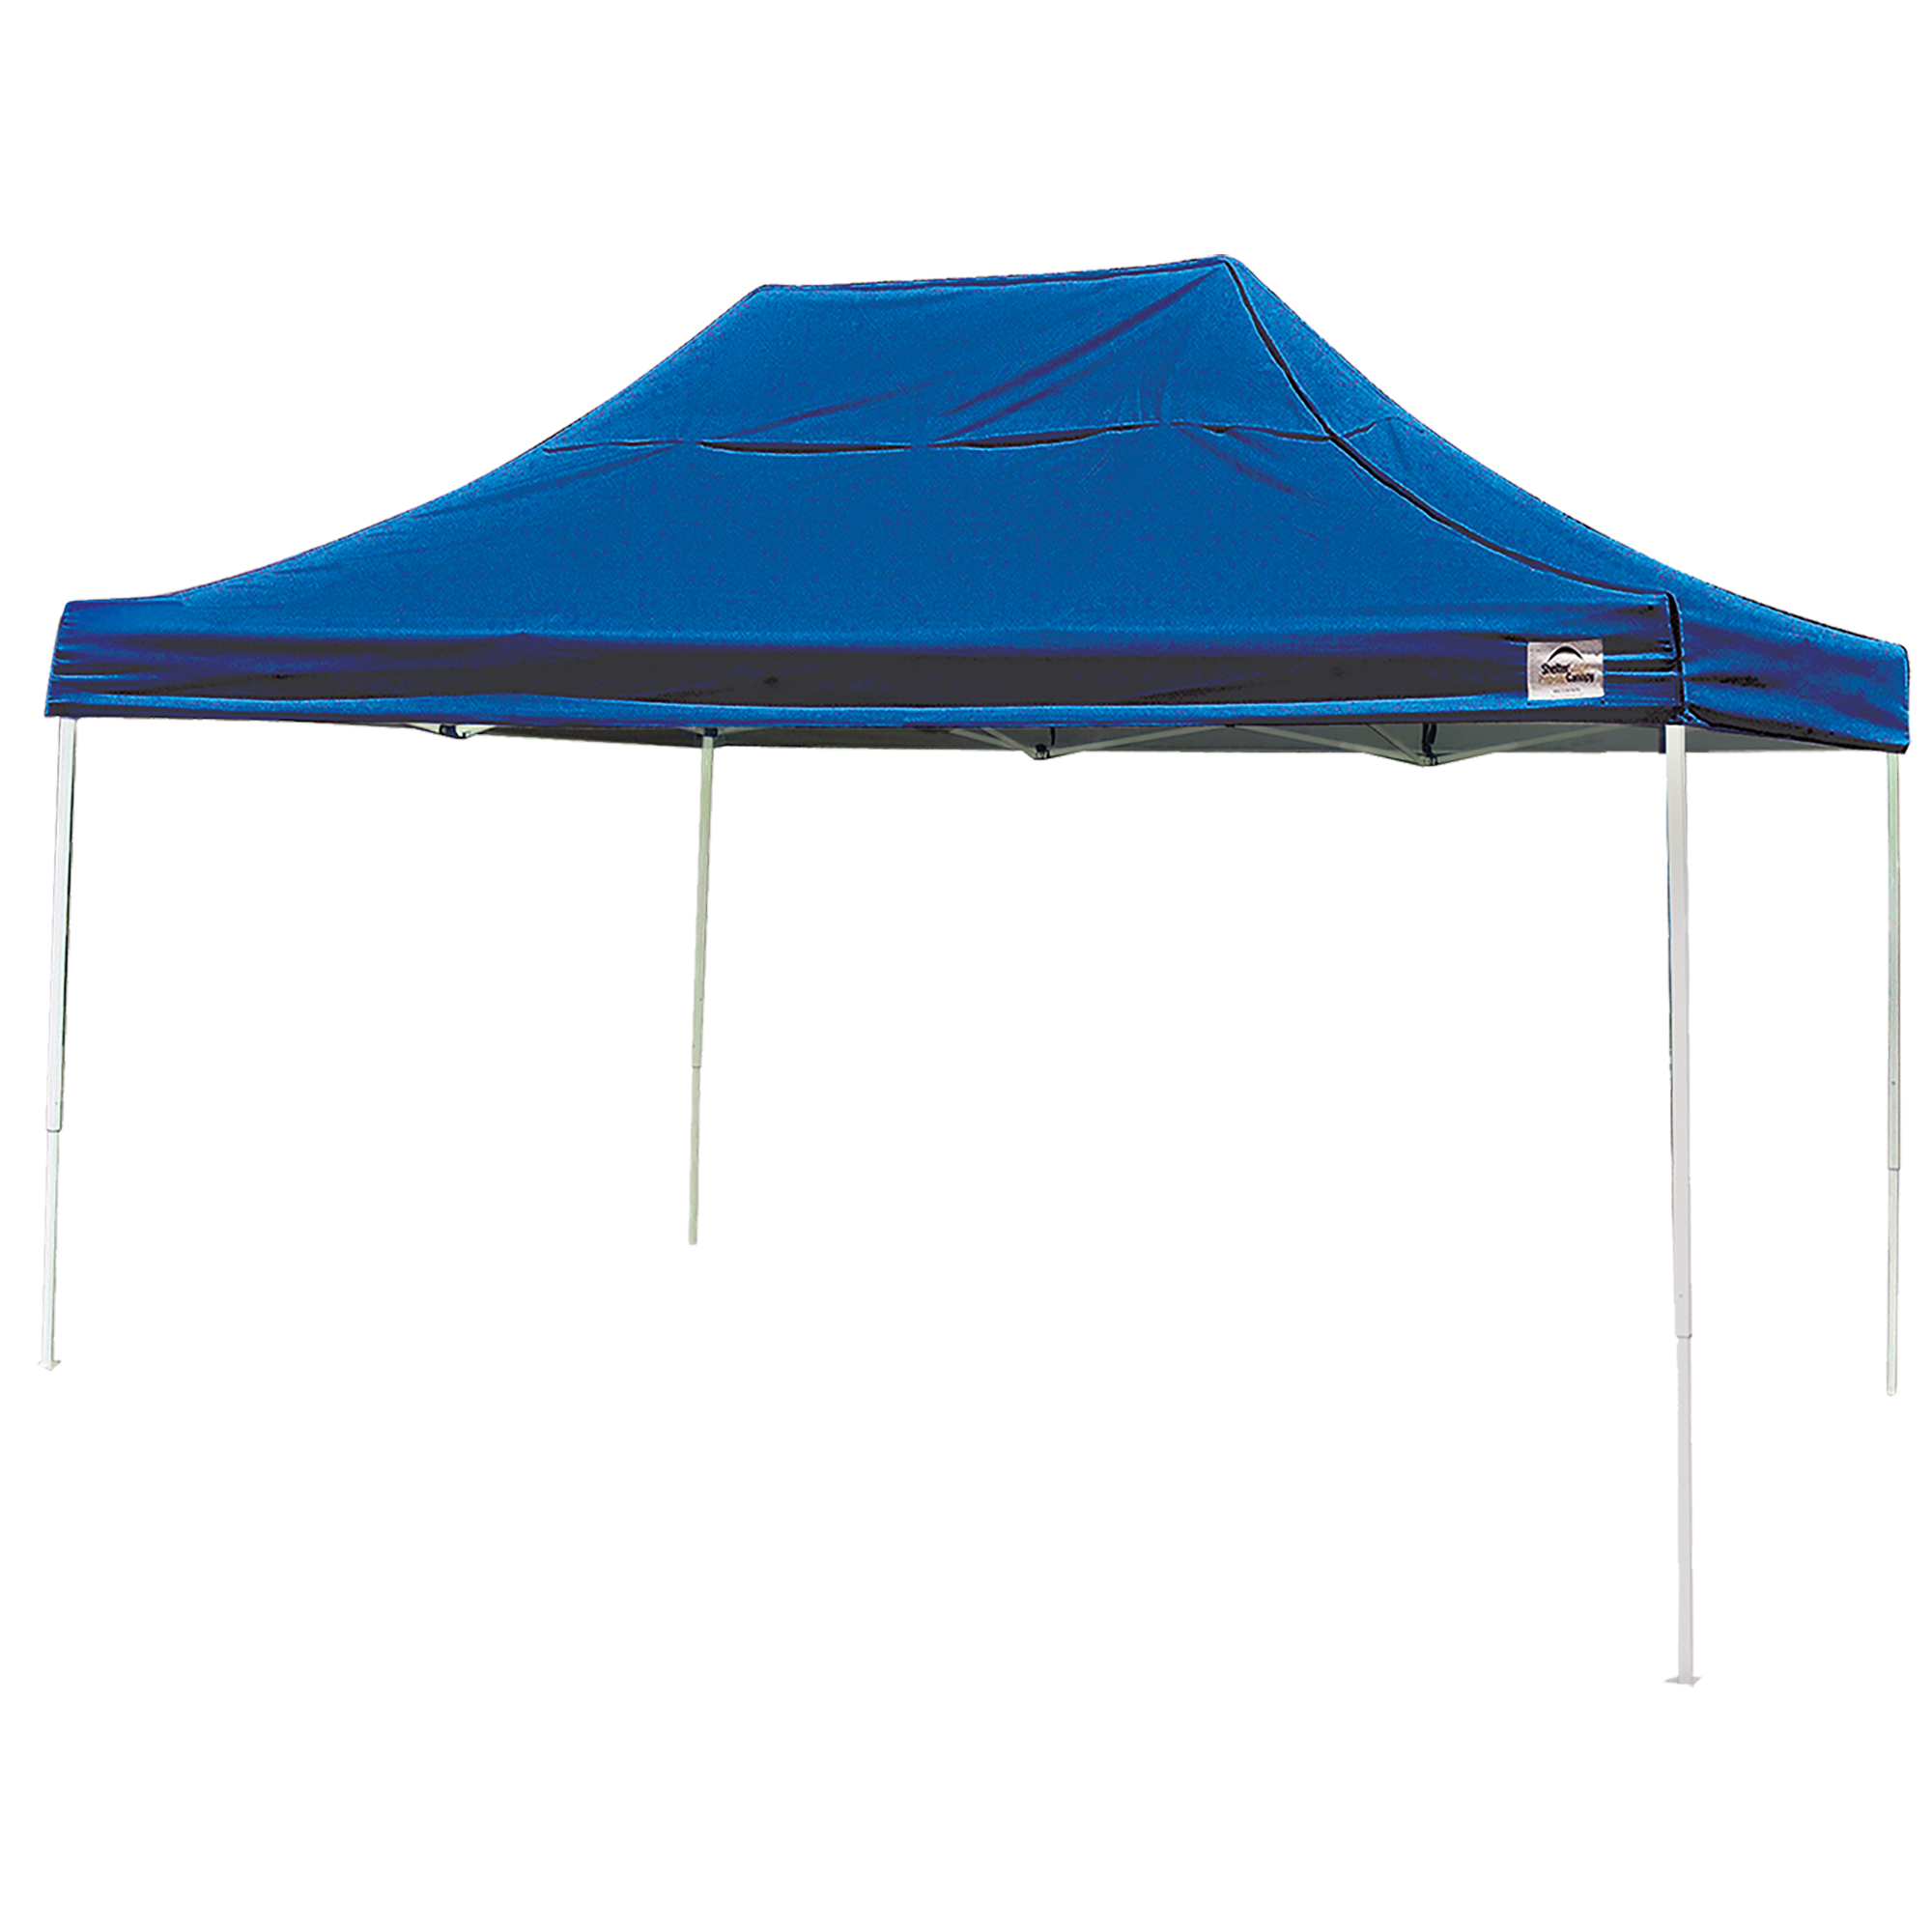 10 Ft. X 15 Ft. Pro Pop-up Canopy Straight Leg, Blue Cover